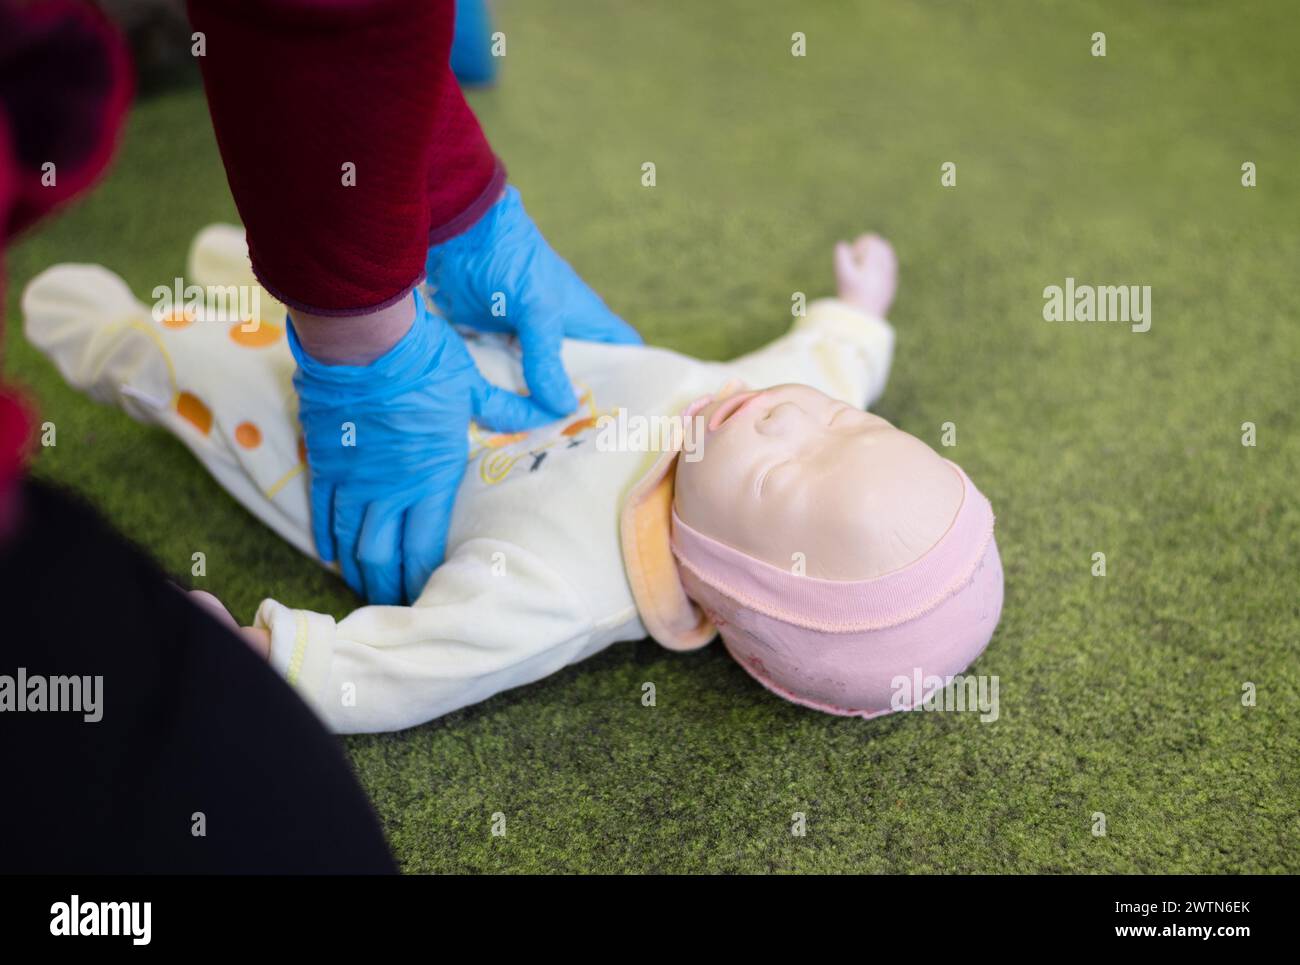 CPR training on an infant training manikin. Stock Photo